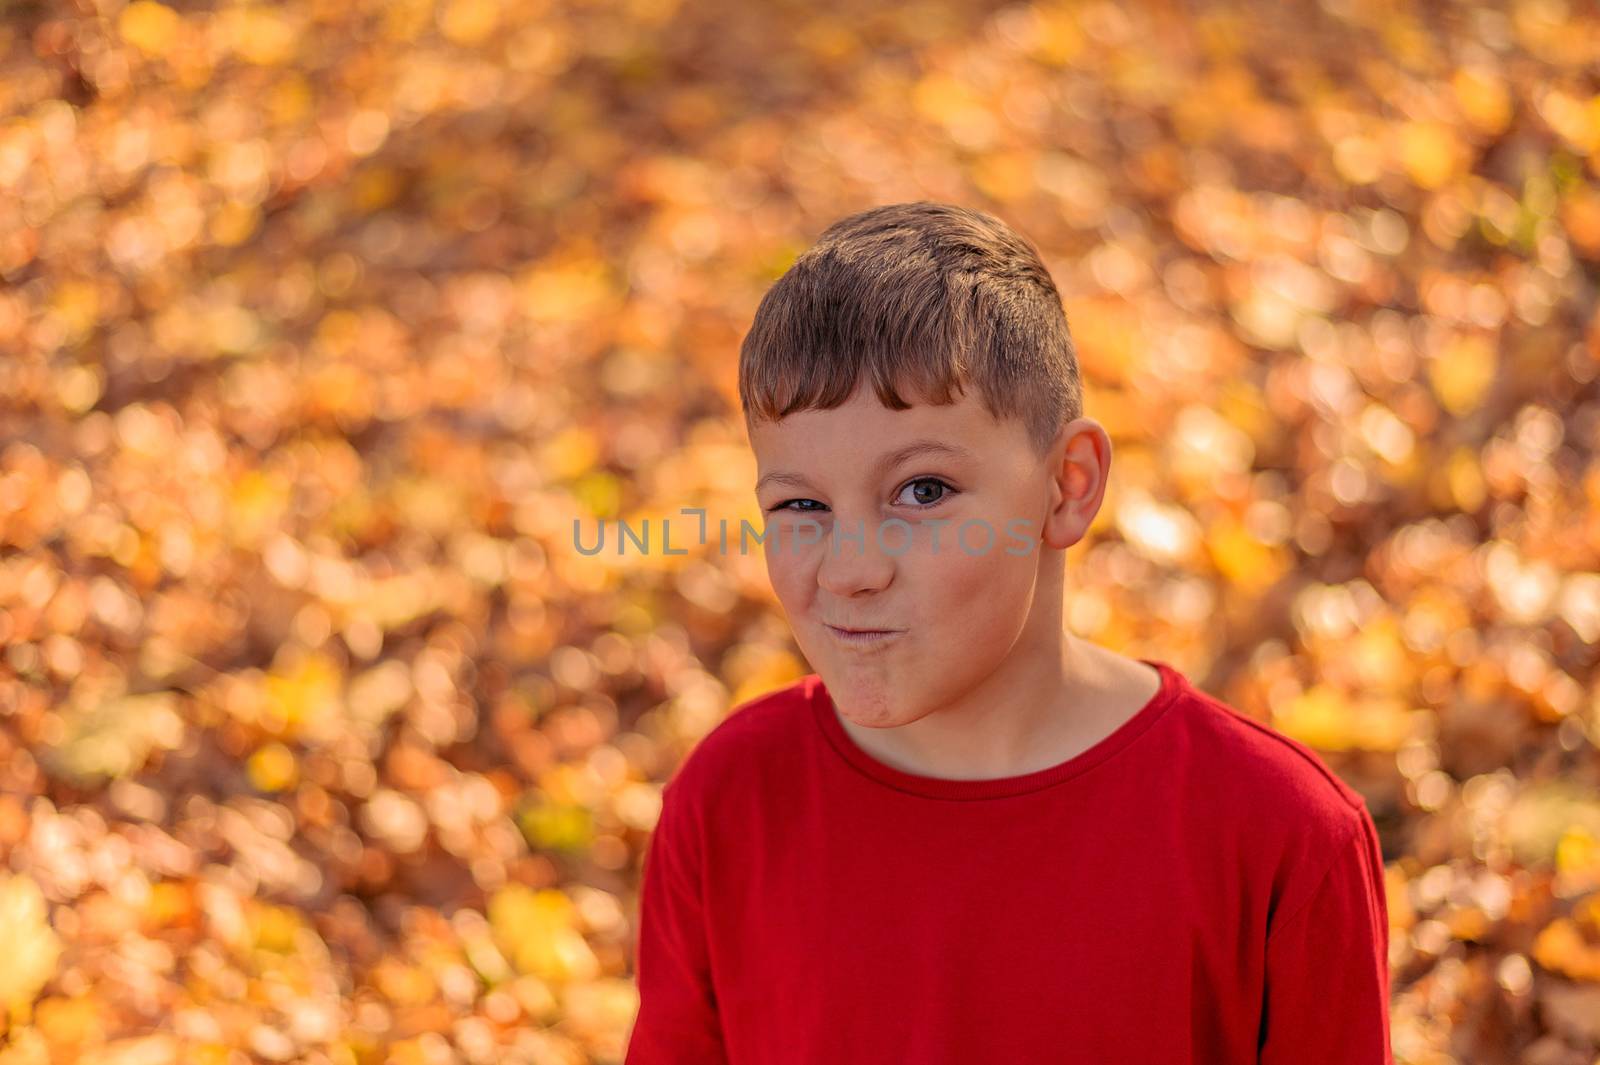 close portrait of a cunning boy with a funny squinted face against a background of yellow autumn leaves